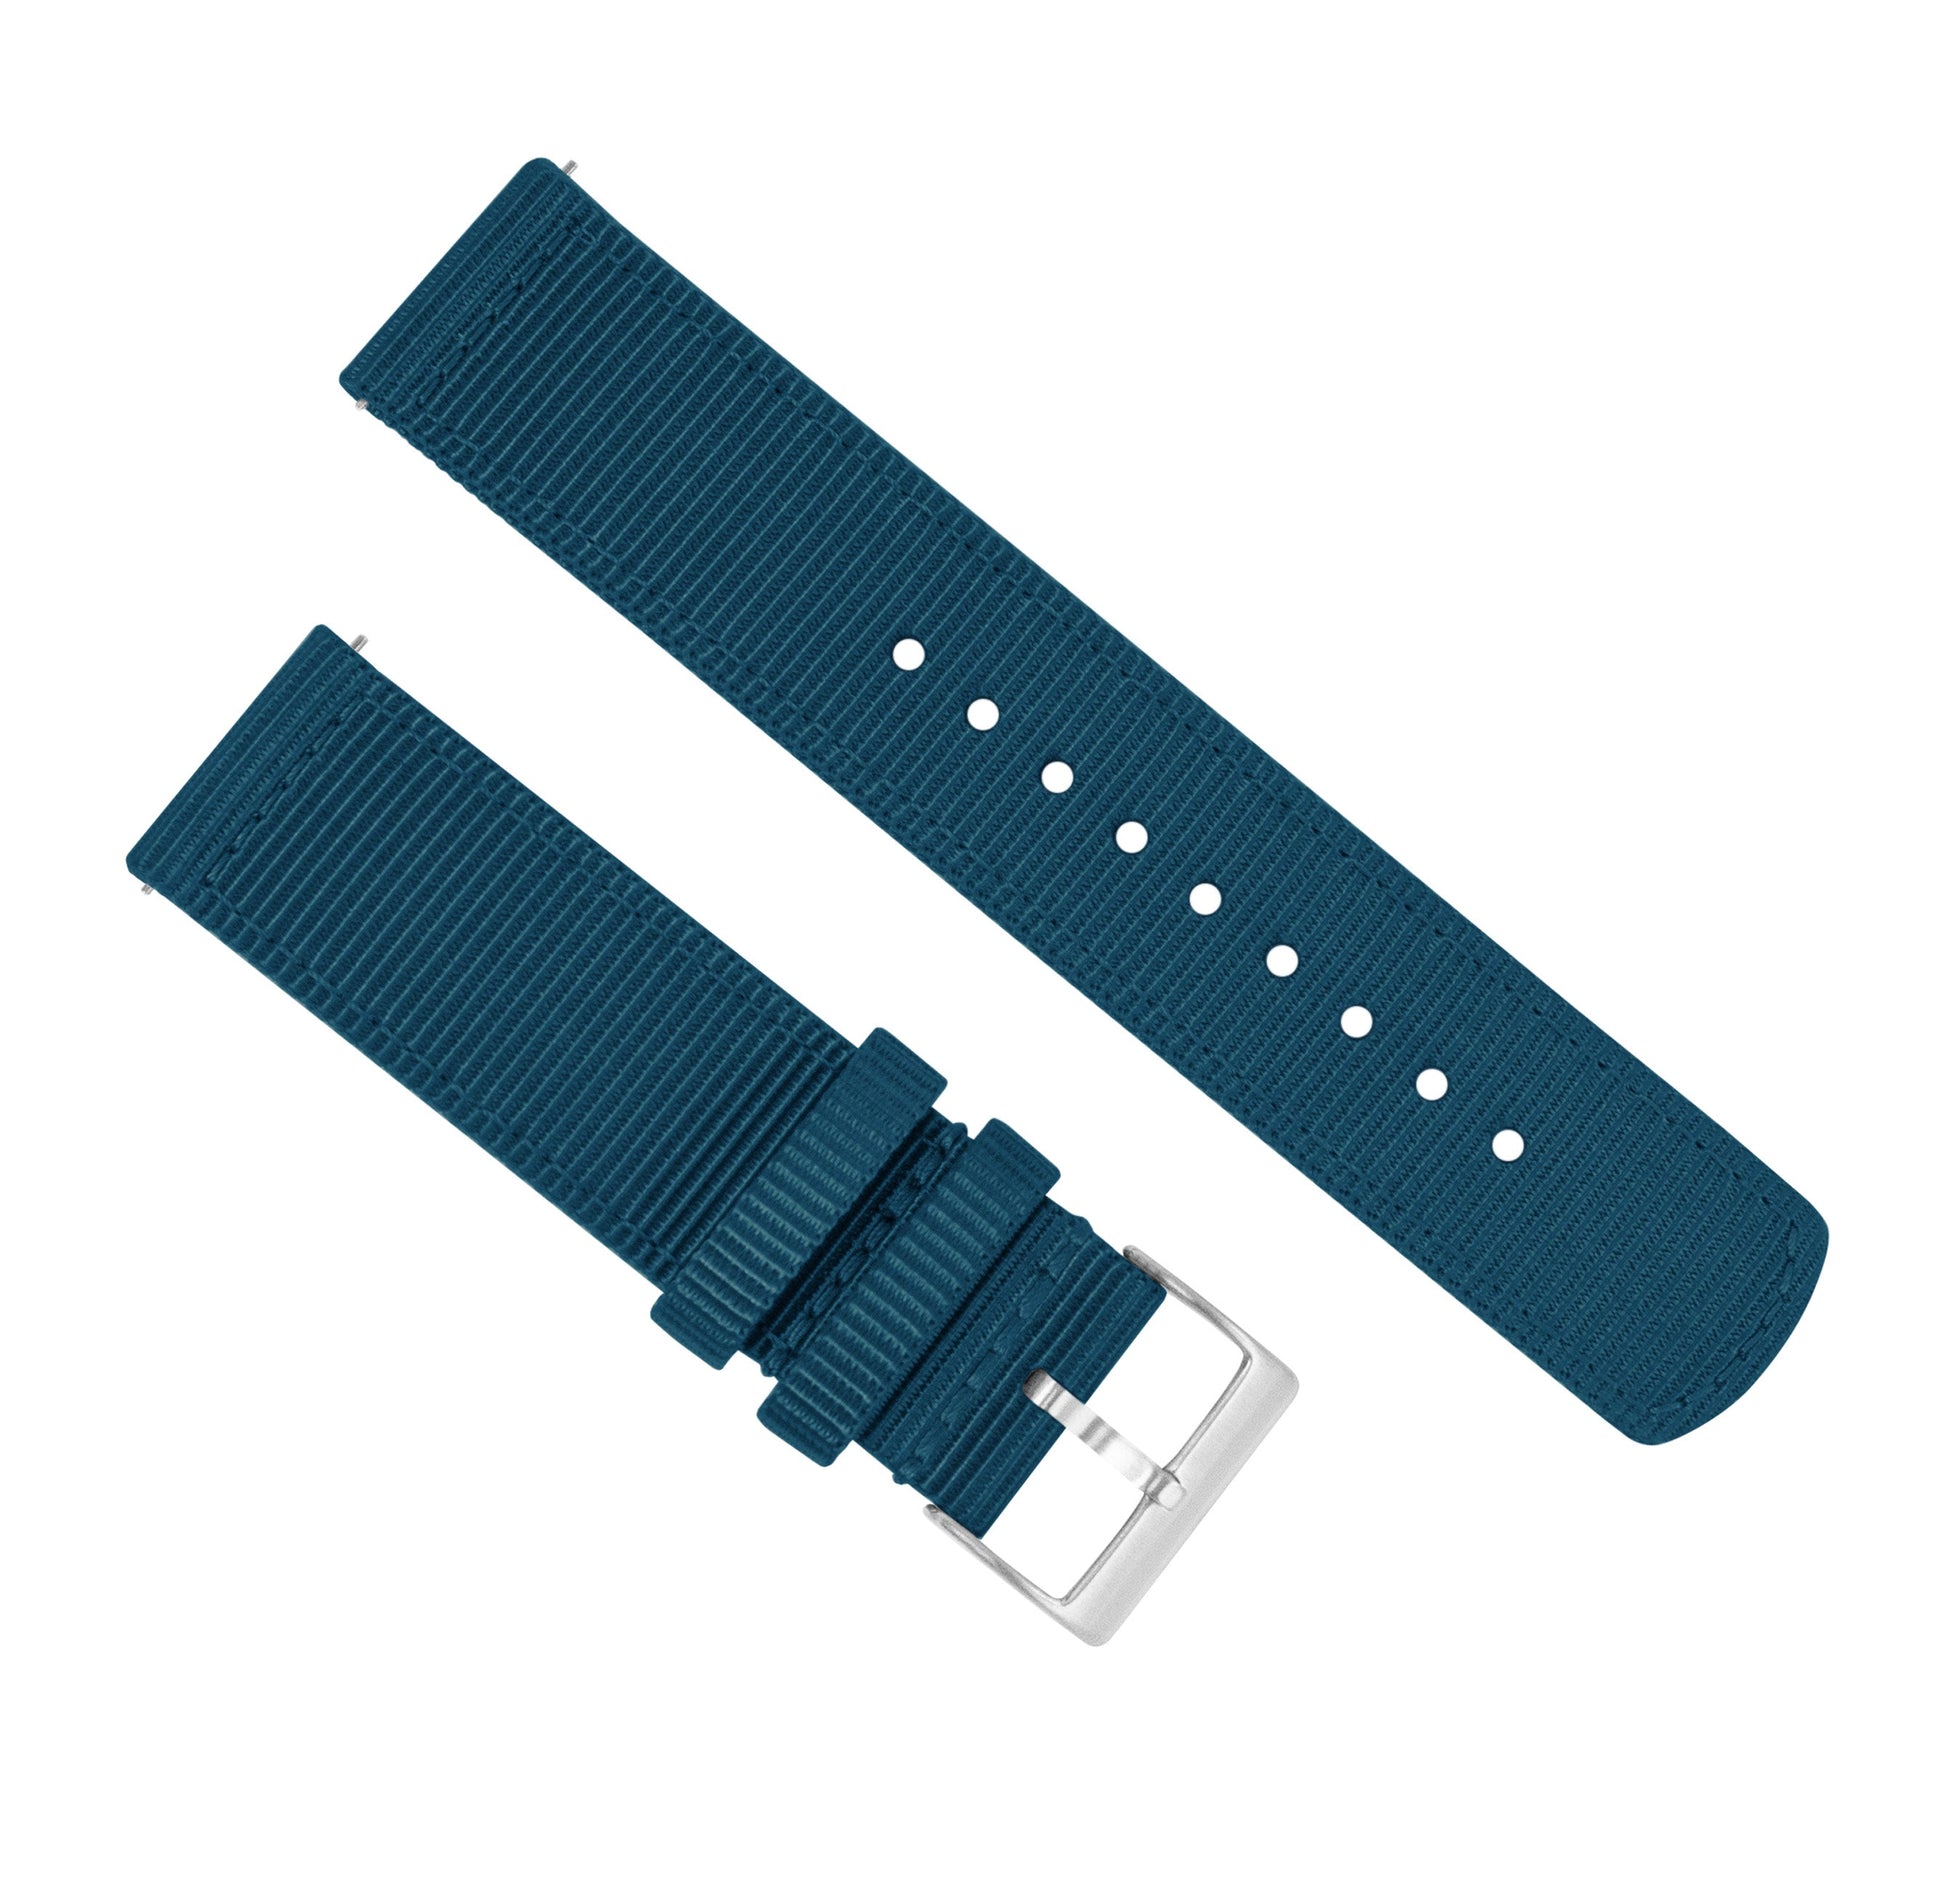 MOONSWATCH Bip | Two-Piece NATO Style | Steel Blue - Barton Watch Bands